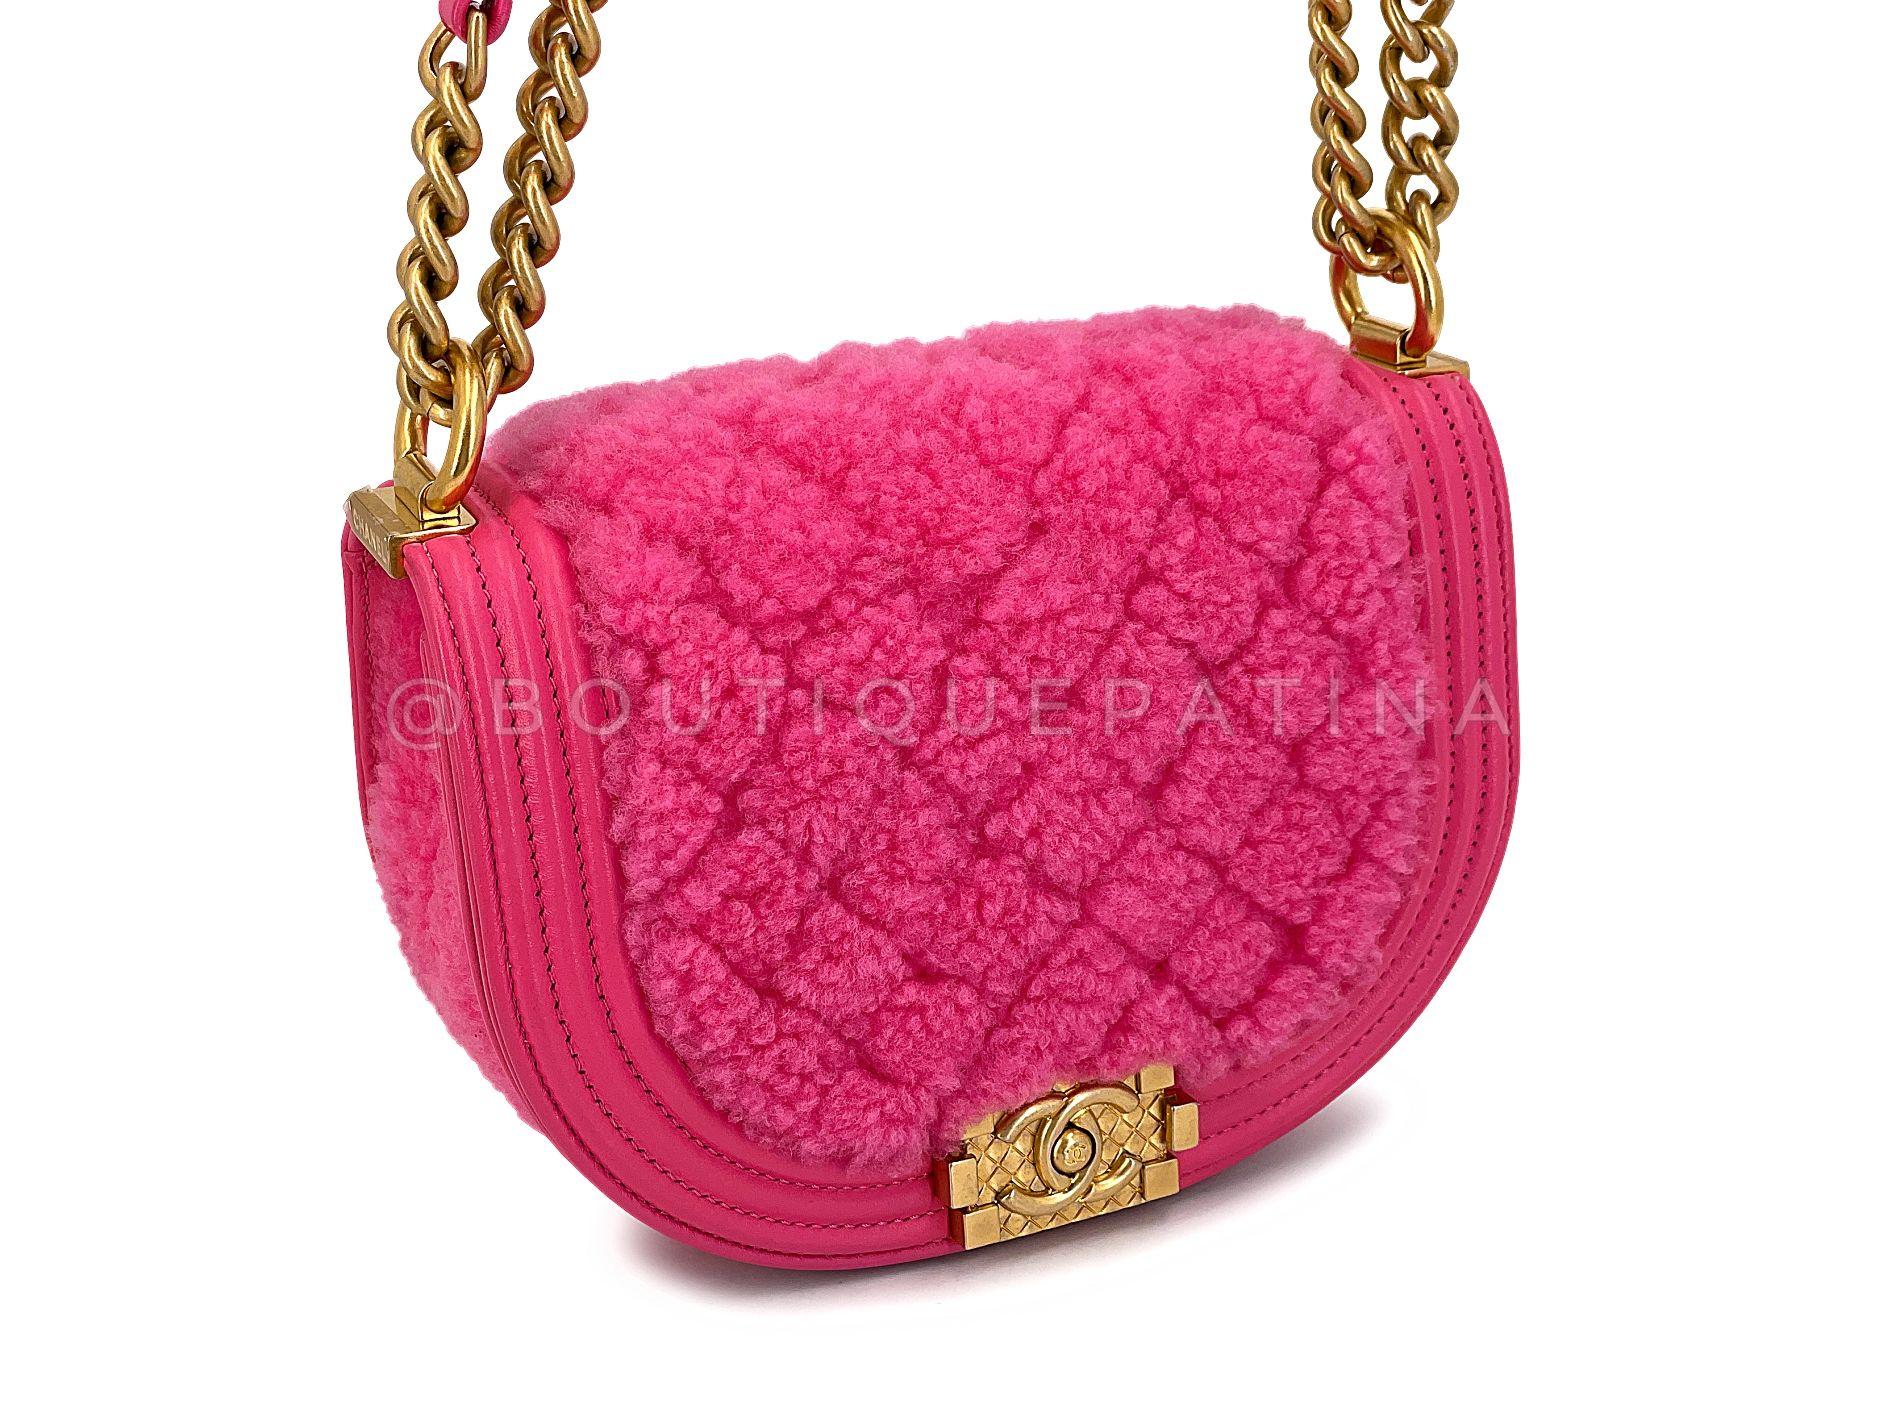 Chanel Fuchsia Pink Shearling Round Boy Flap Bag GHW 67885 In Excellent Condition For Sale In Costa Mesa, CA